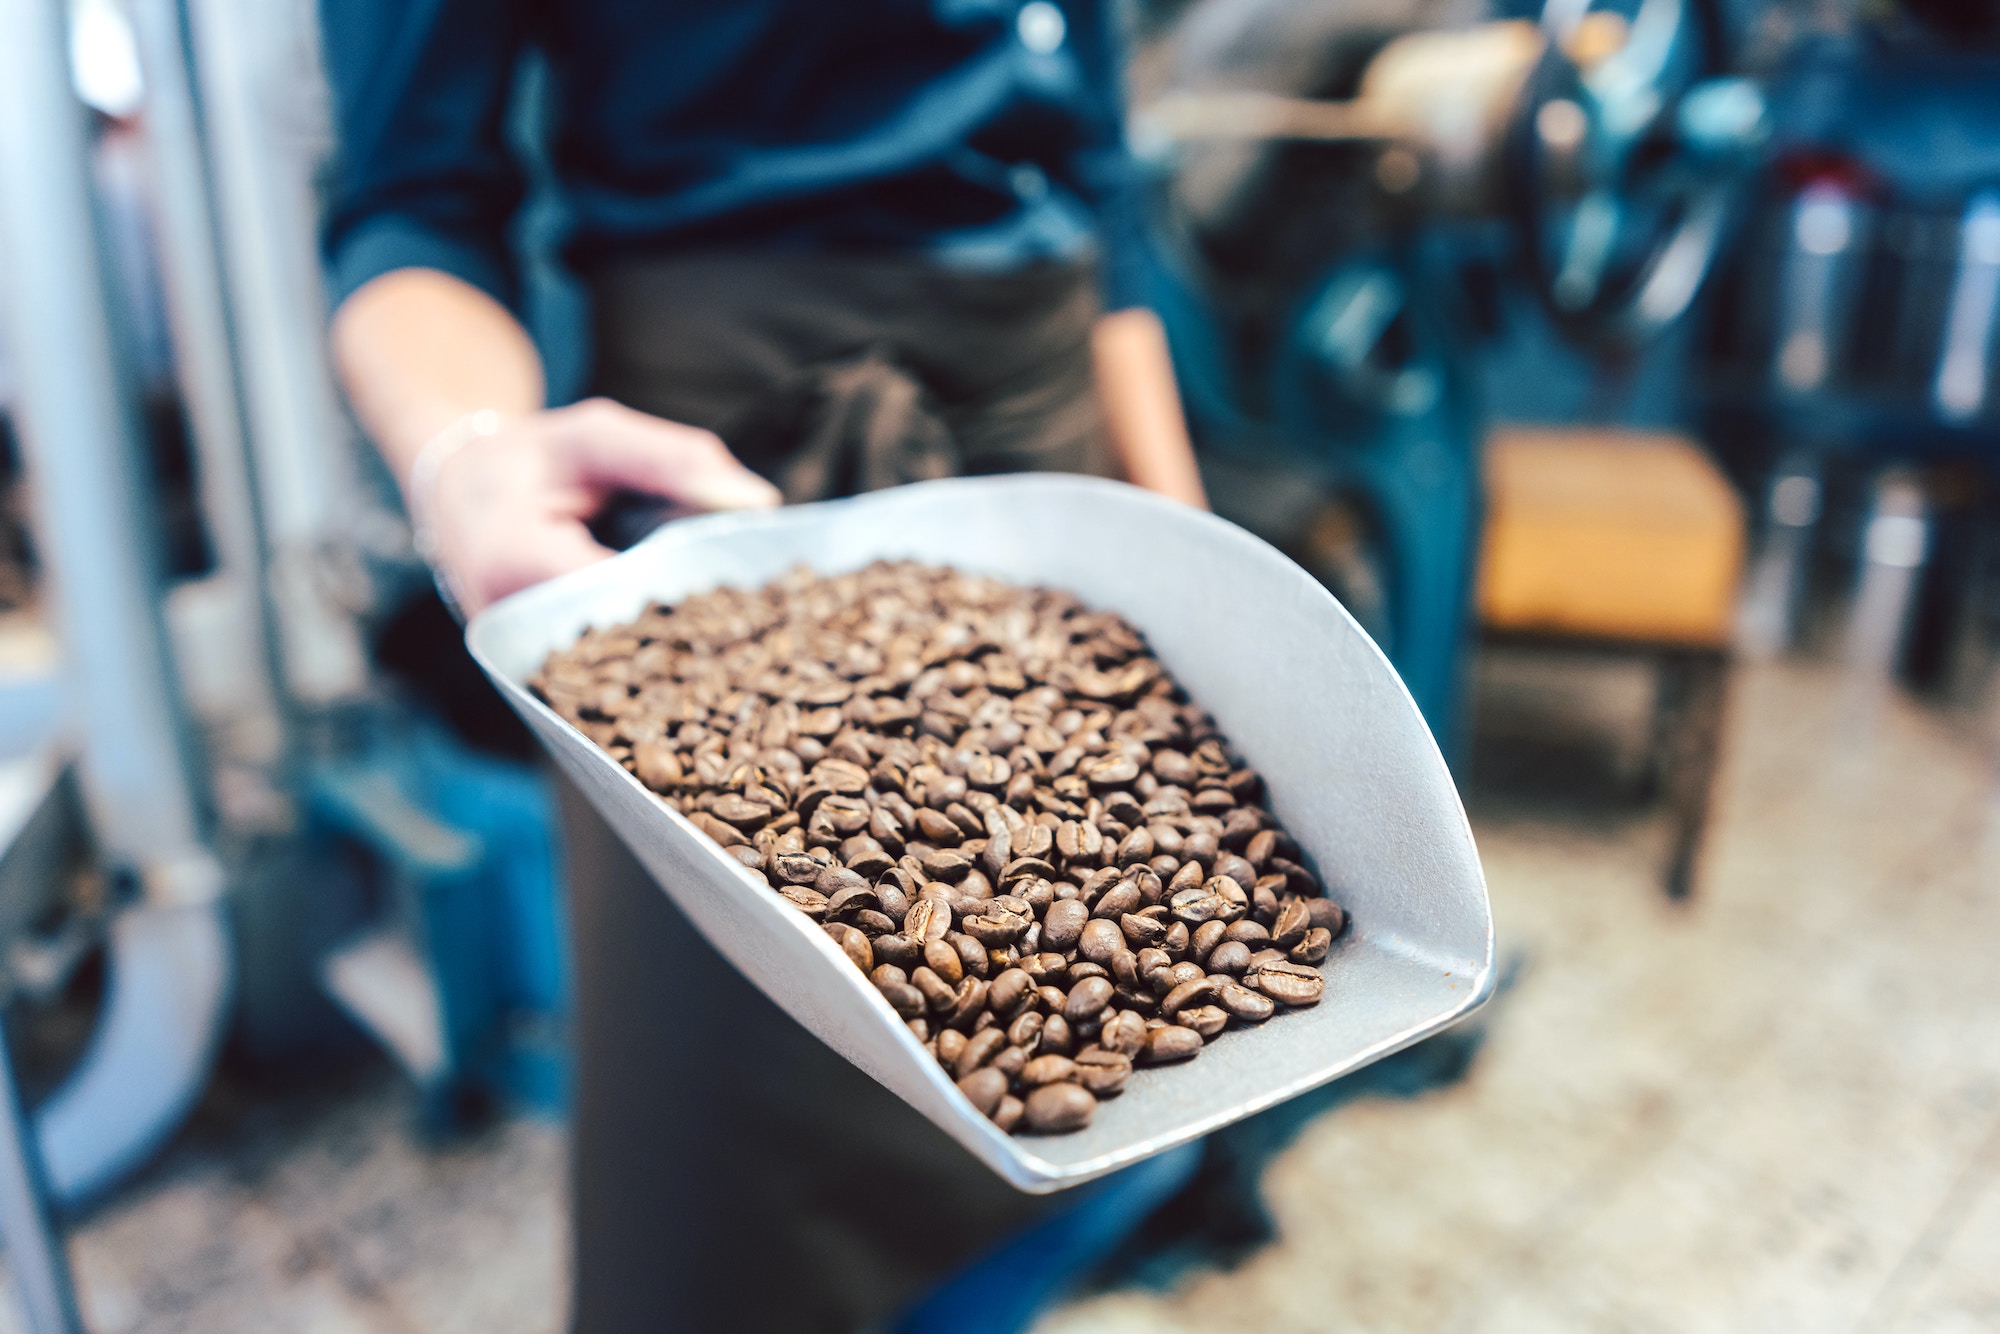 Fresh Roasted Coffee Beans Supplier in the Philippines by Coffeellera